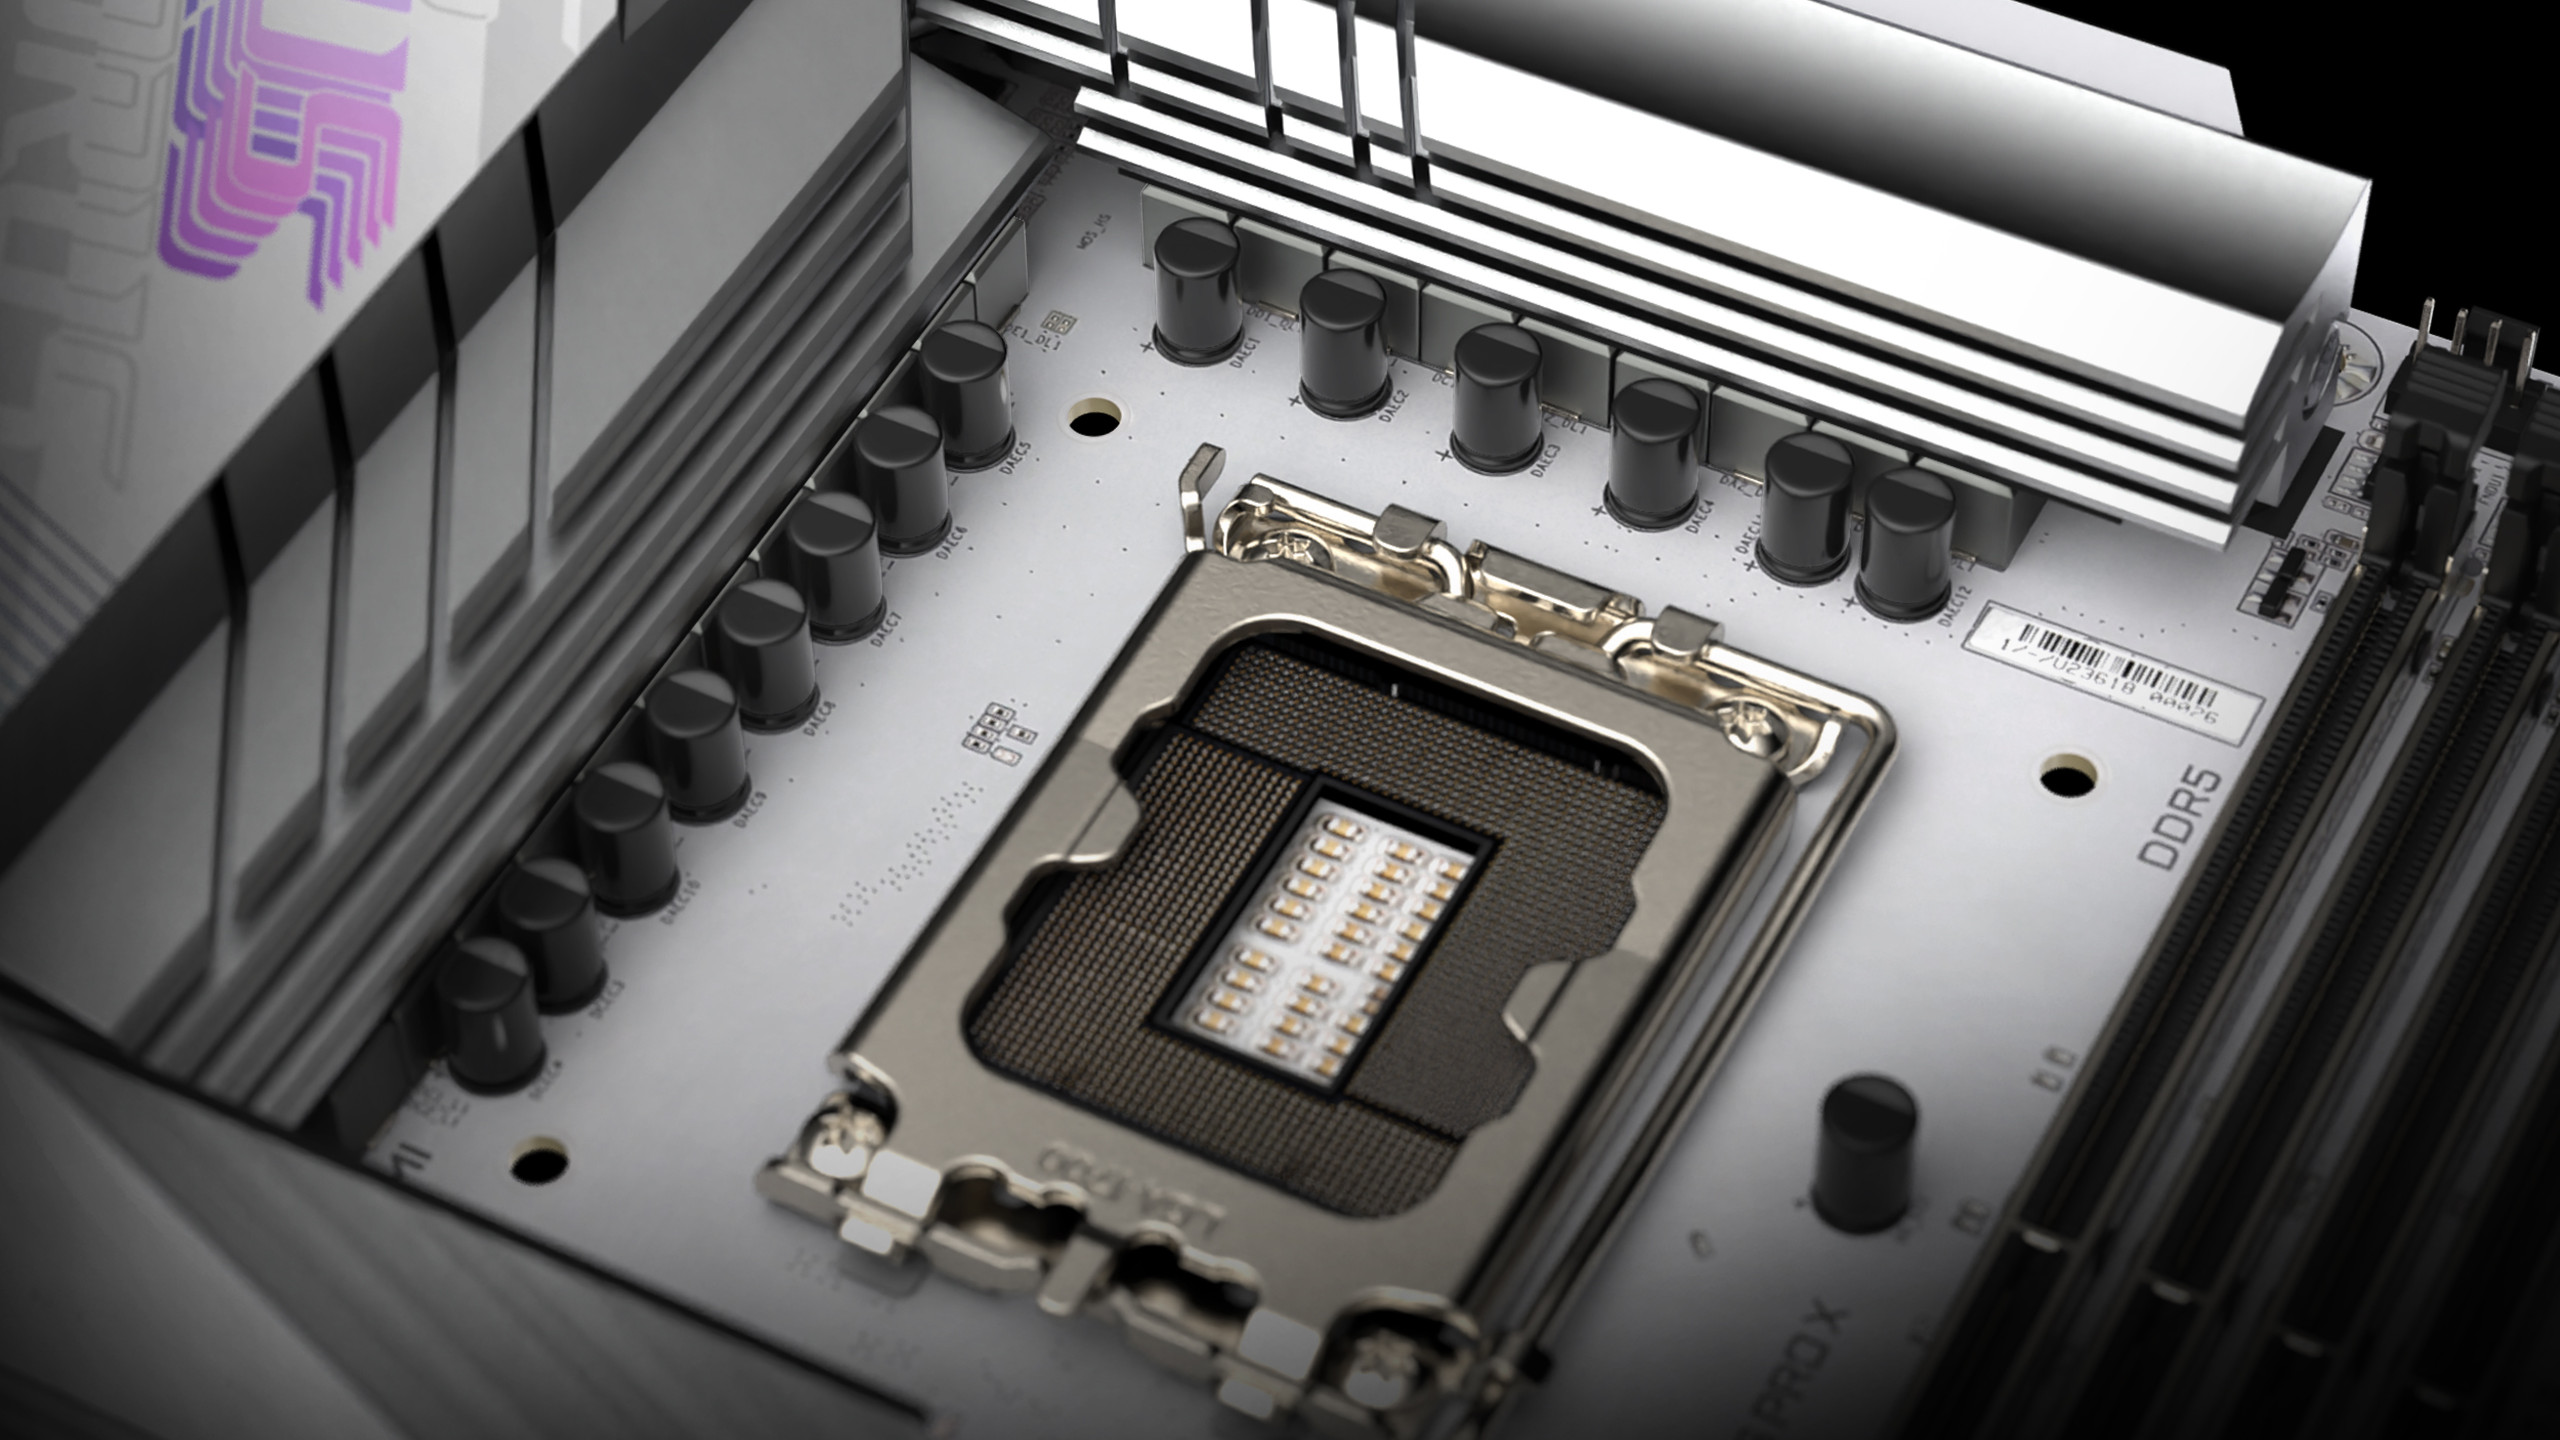 Gigabyte’s heavy-handed fix for Intel Core i9 CPU instability drops performance to Core i7 levels in some cases – but don’t panic yet